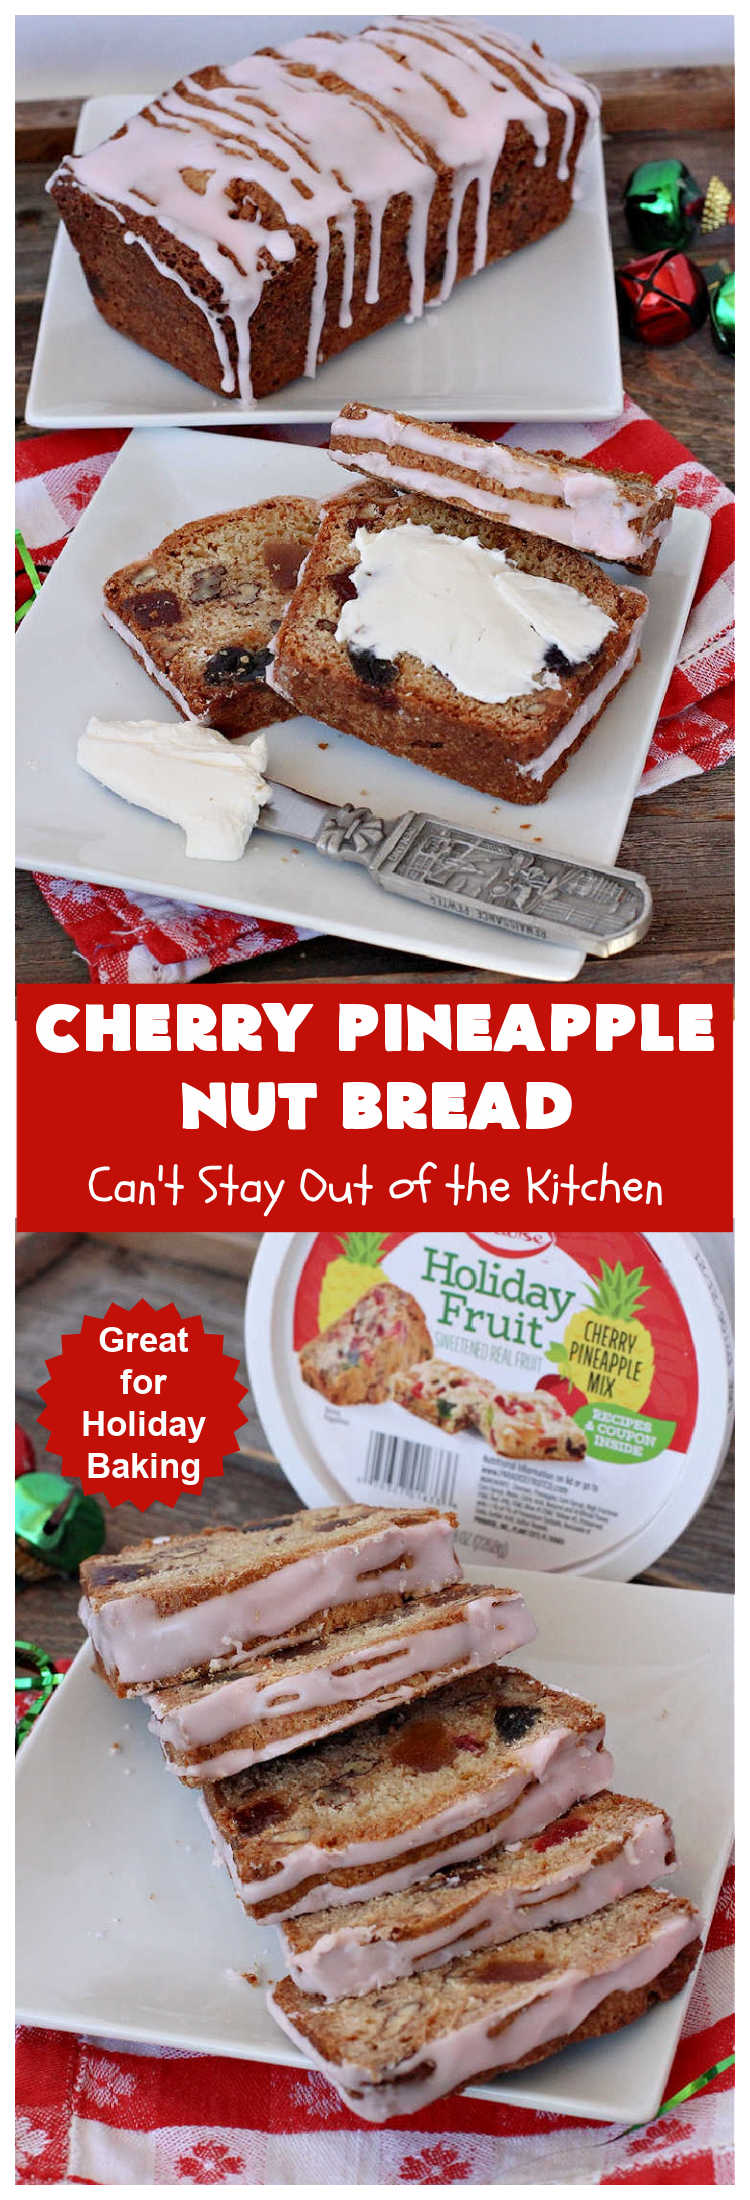 Cherry Pineapple Nut Bread | Can't Stay Out of the Kitchen